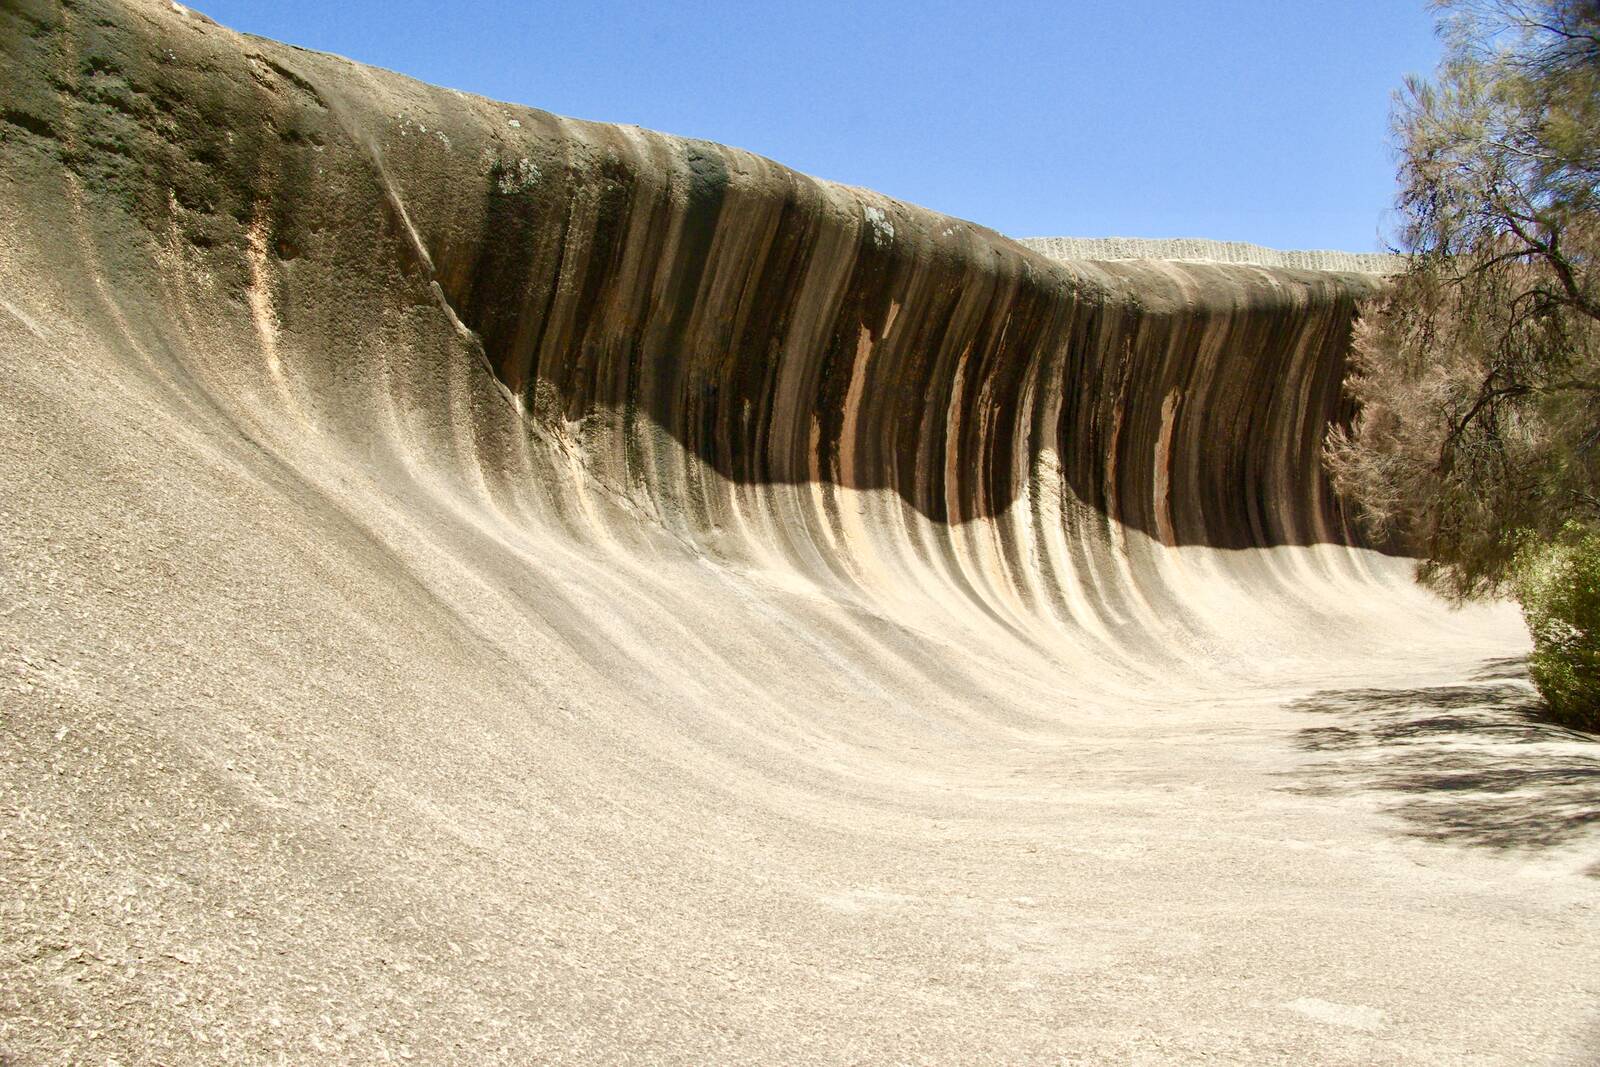 Image of Wave Rock by Nigel Shaw